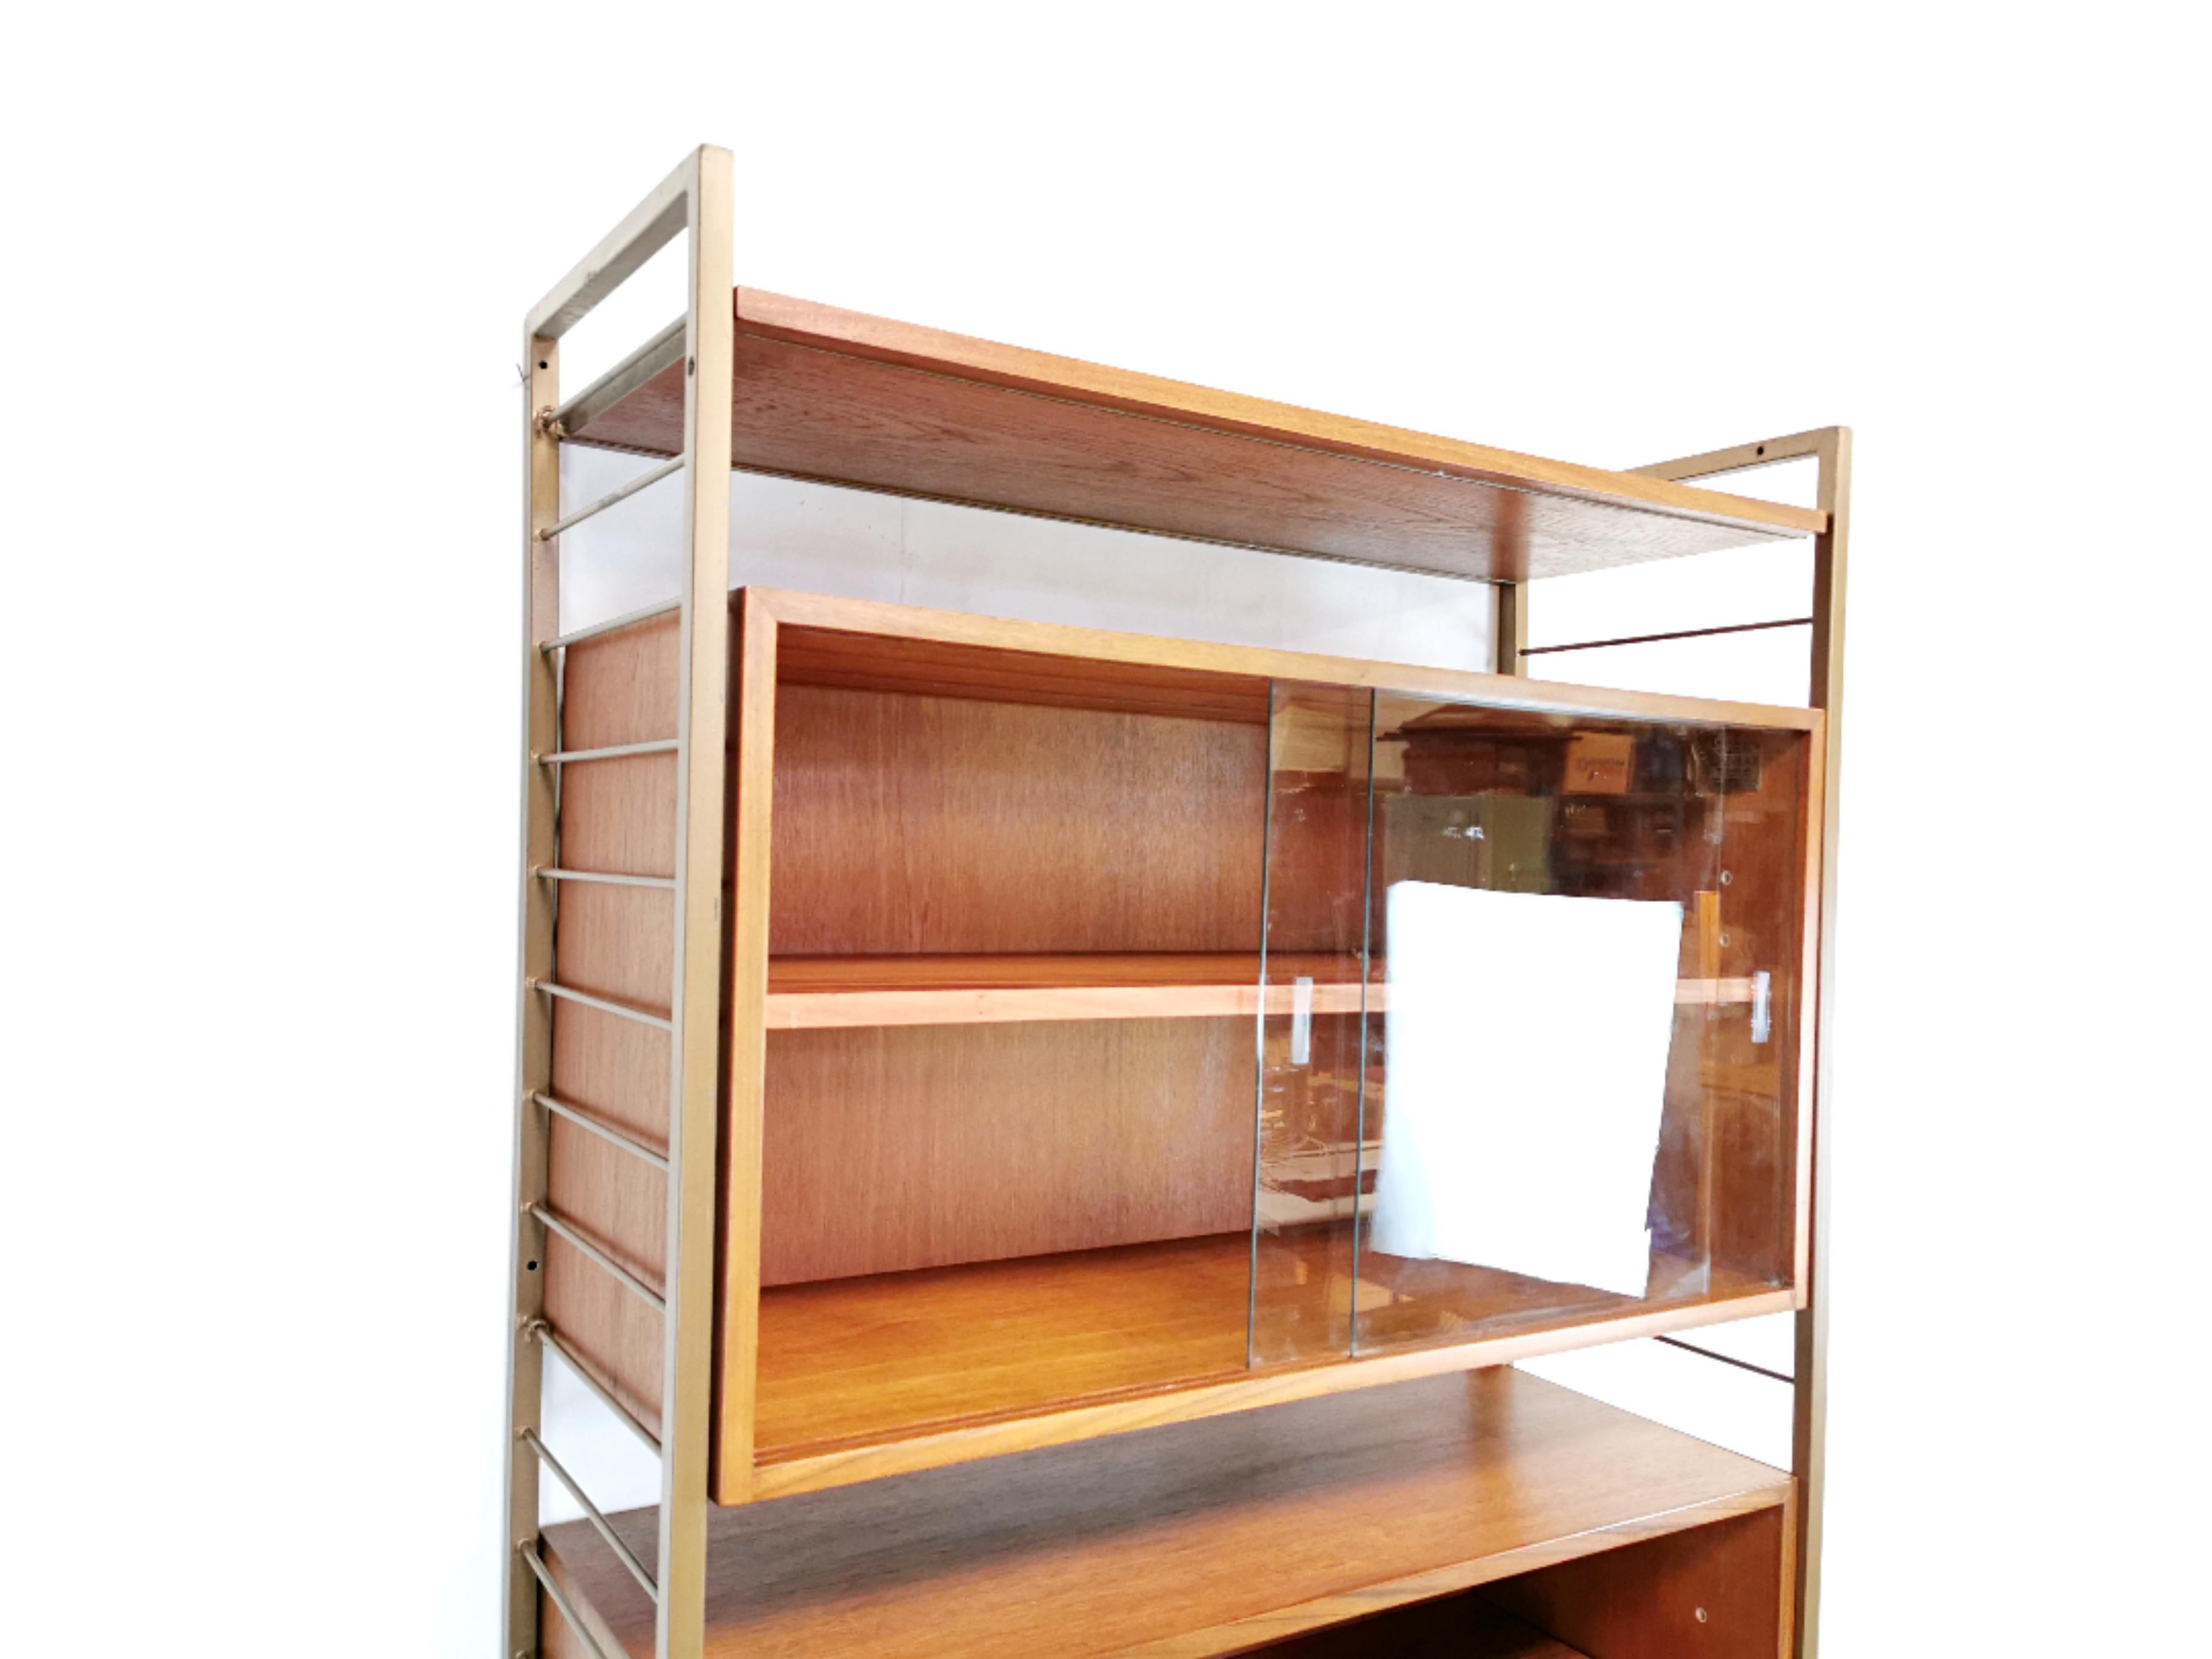 Single bay Ladderax modular system from the 1960s. 

A very well cared for example.

Fully adjustable internal shelving and cabinets.
 